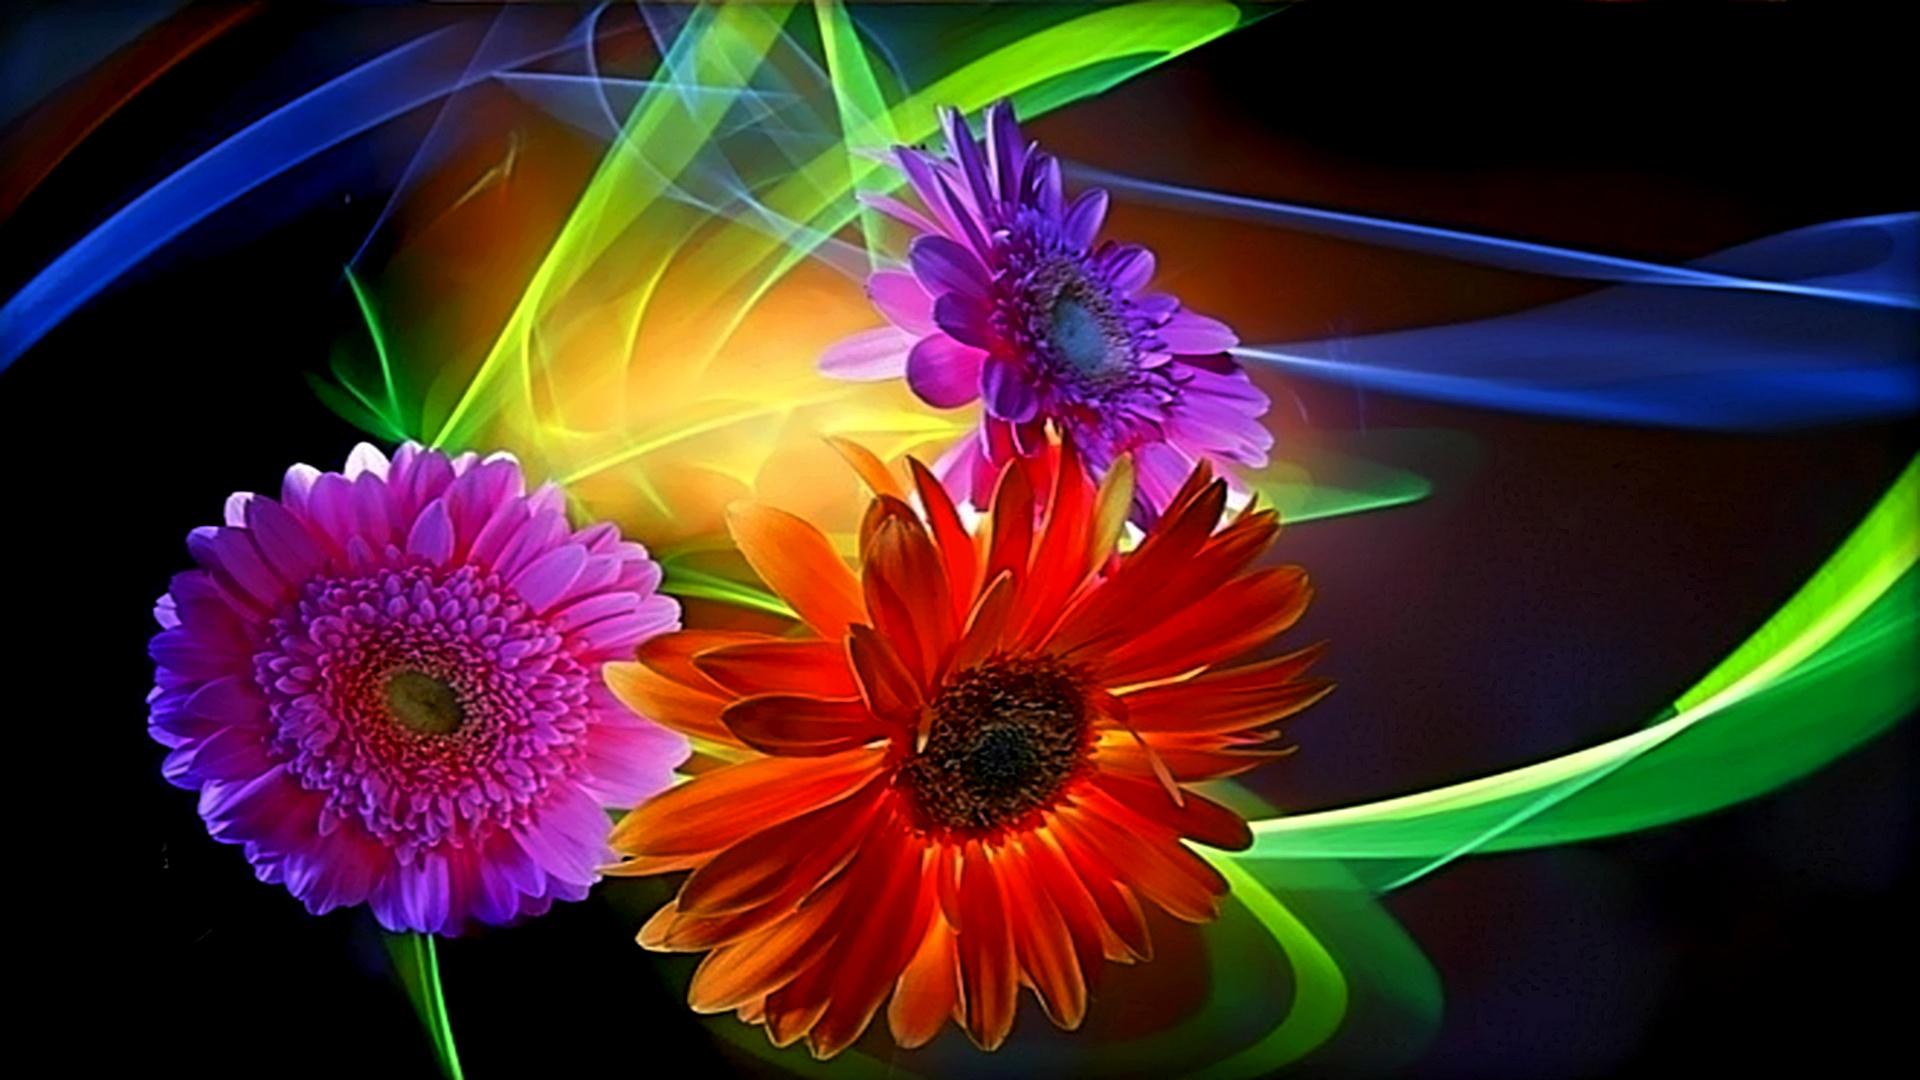 Cool abstract flower wallpapers HD